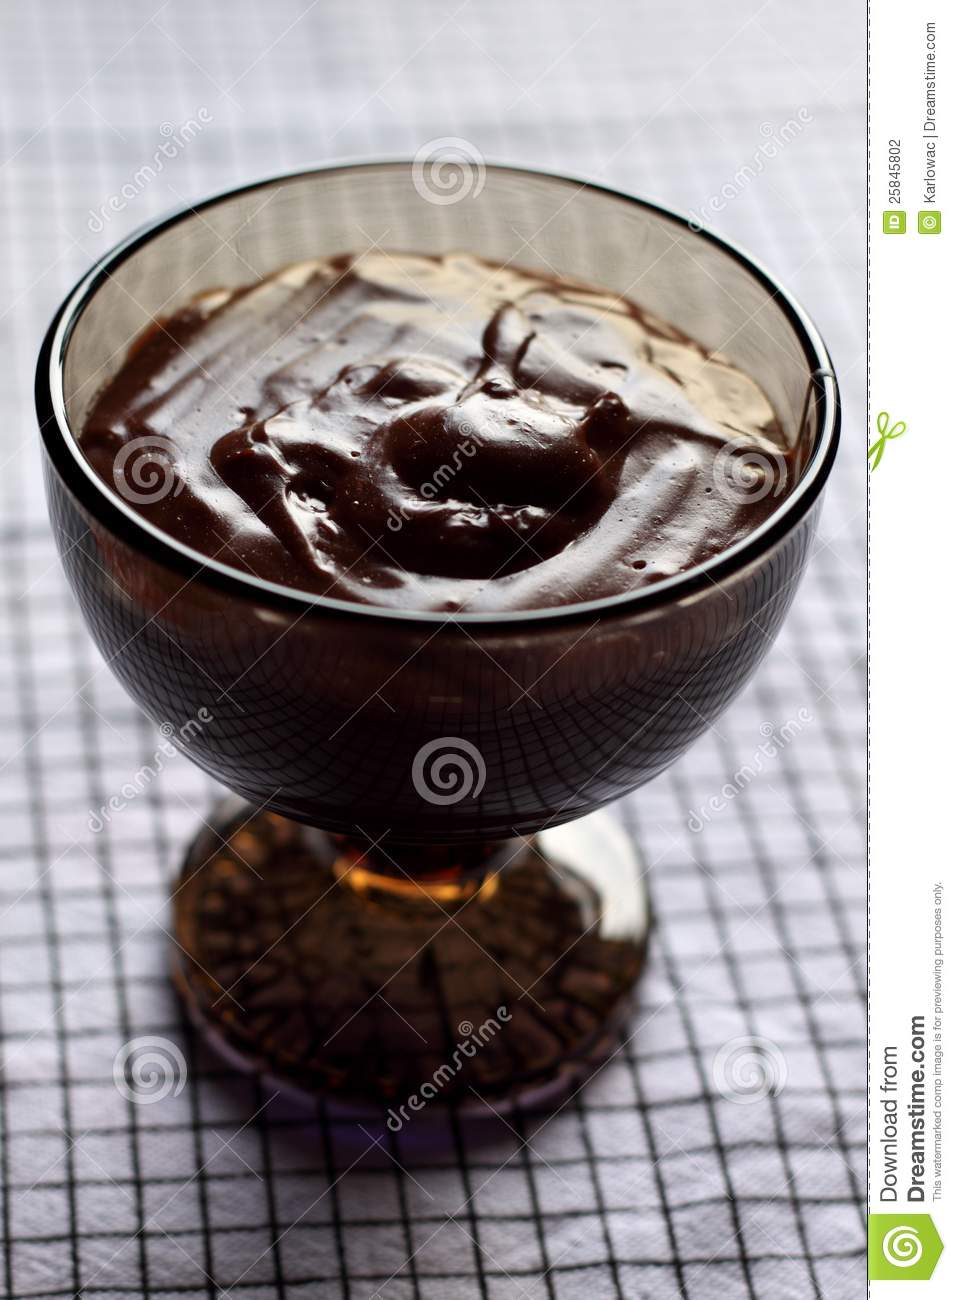 Chocolate Pudding In Black Bowl Stock Photography   Image  25845802